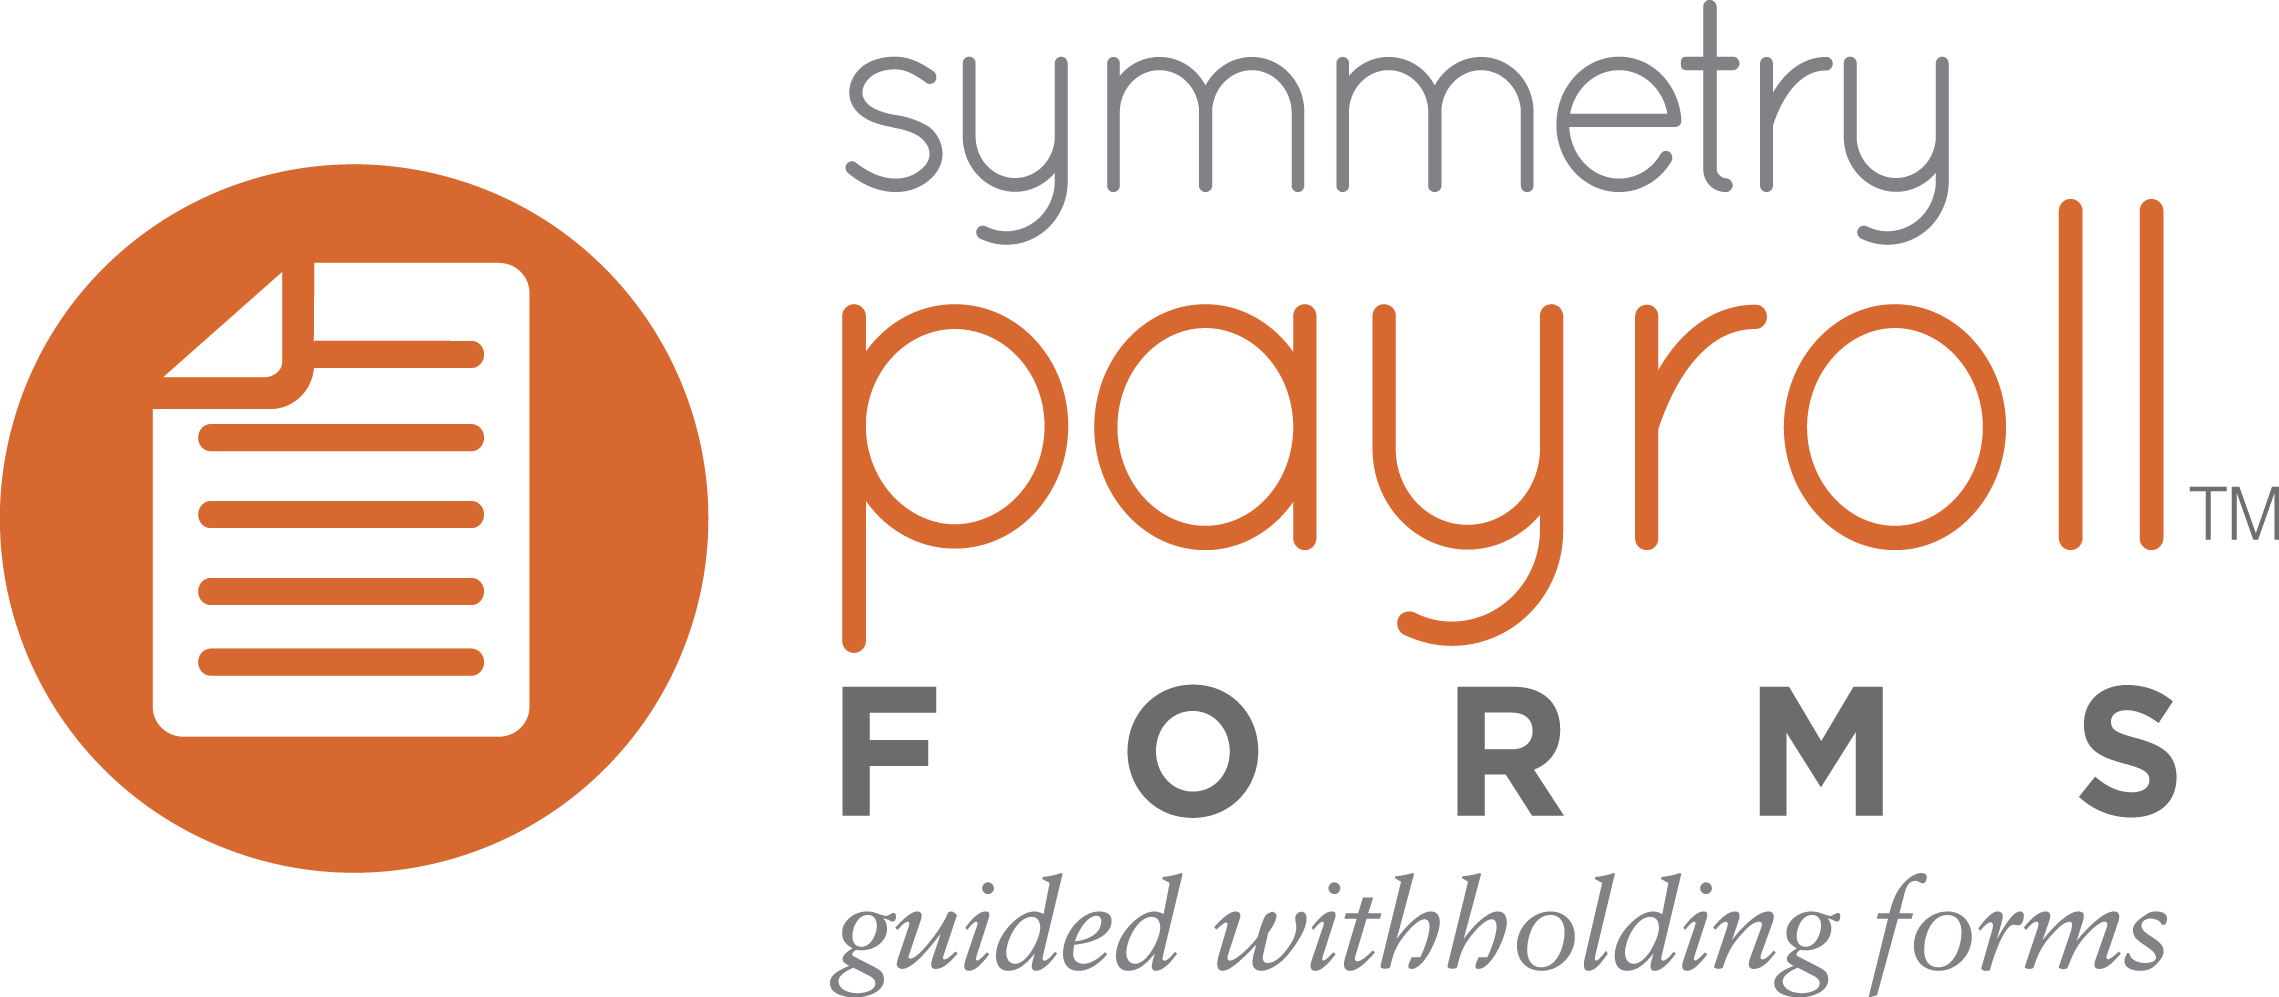 Symmetry Payroll Forms offers a guided withholding form process for federal, state, and local forms.